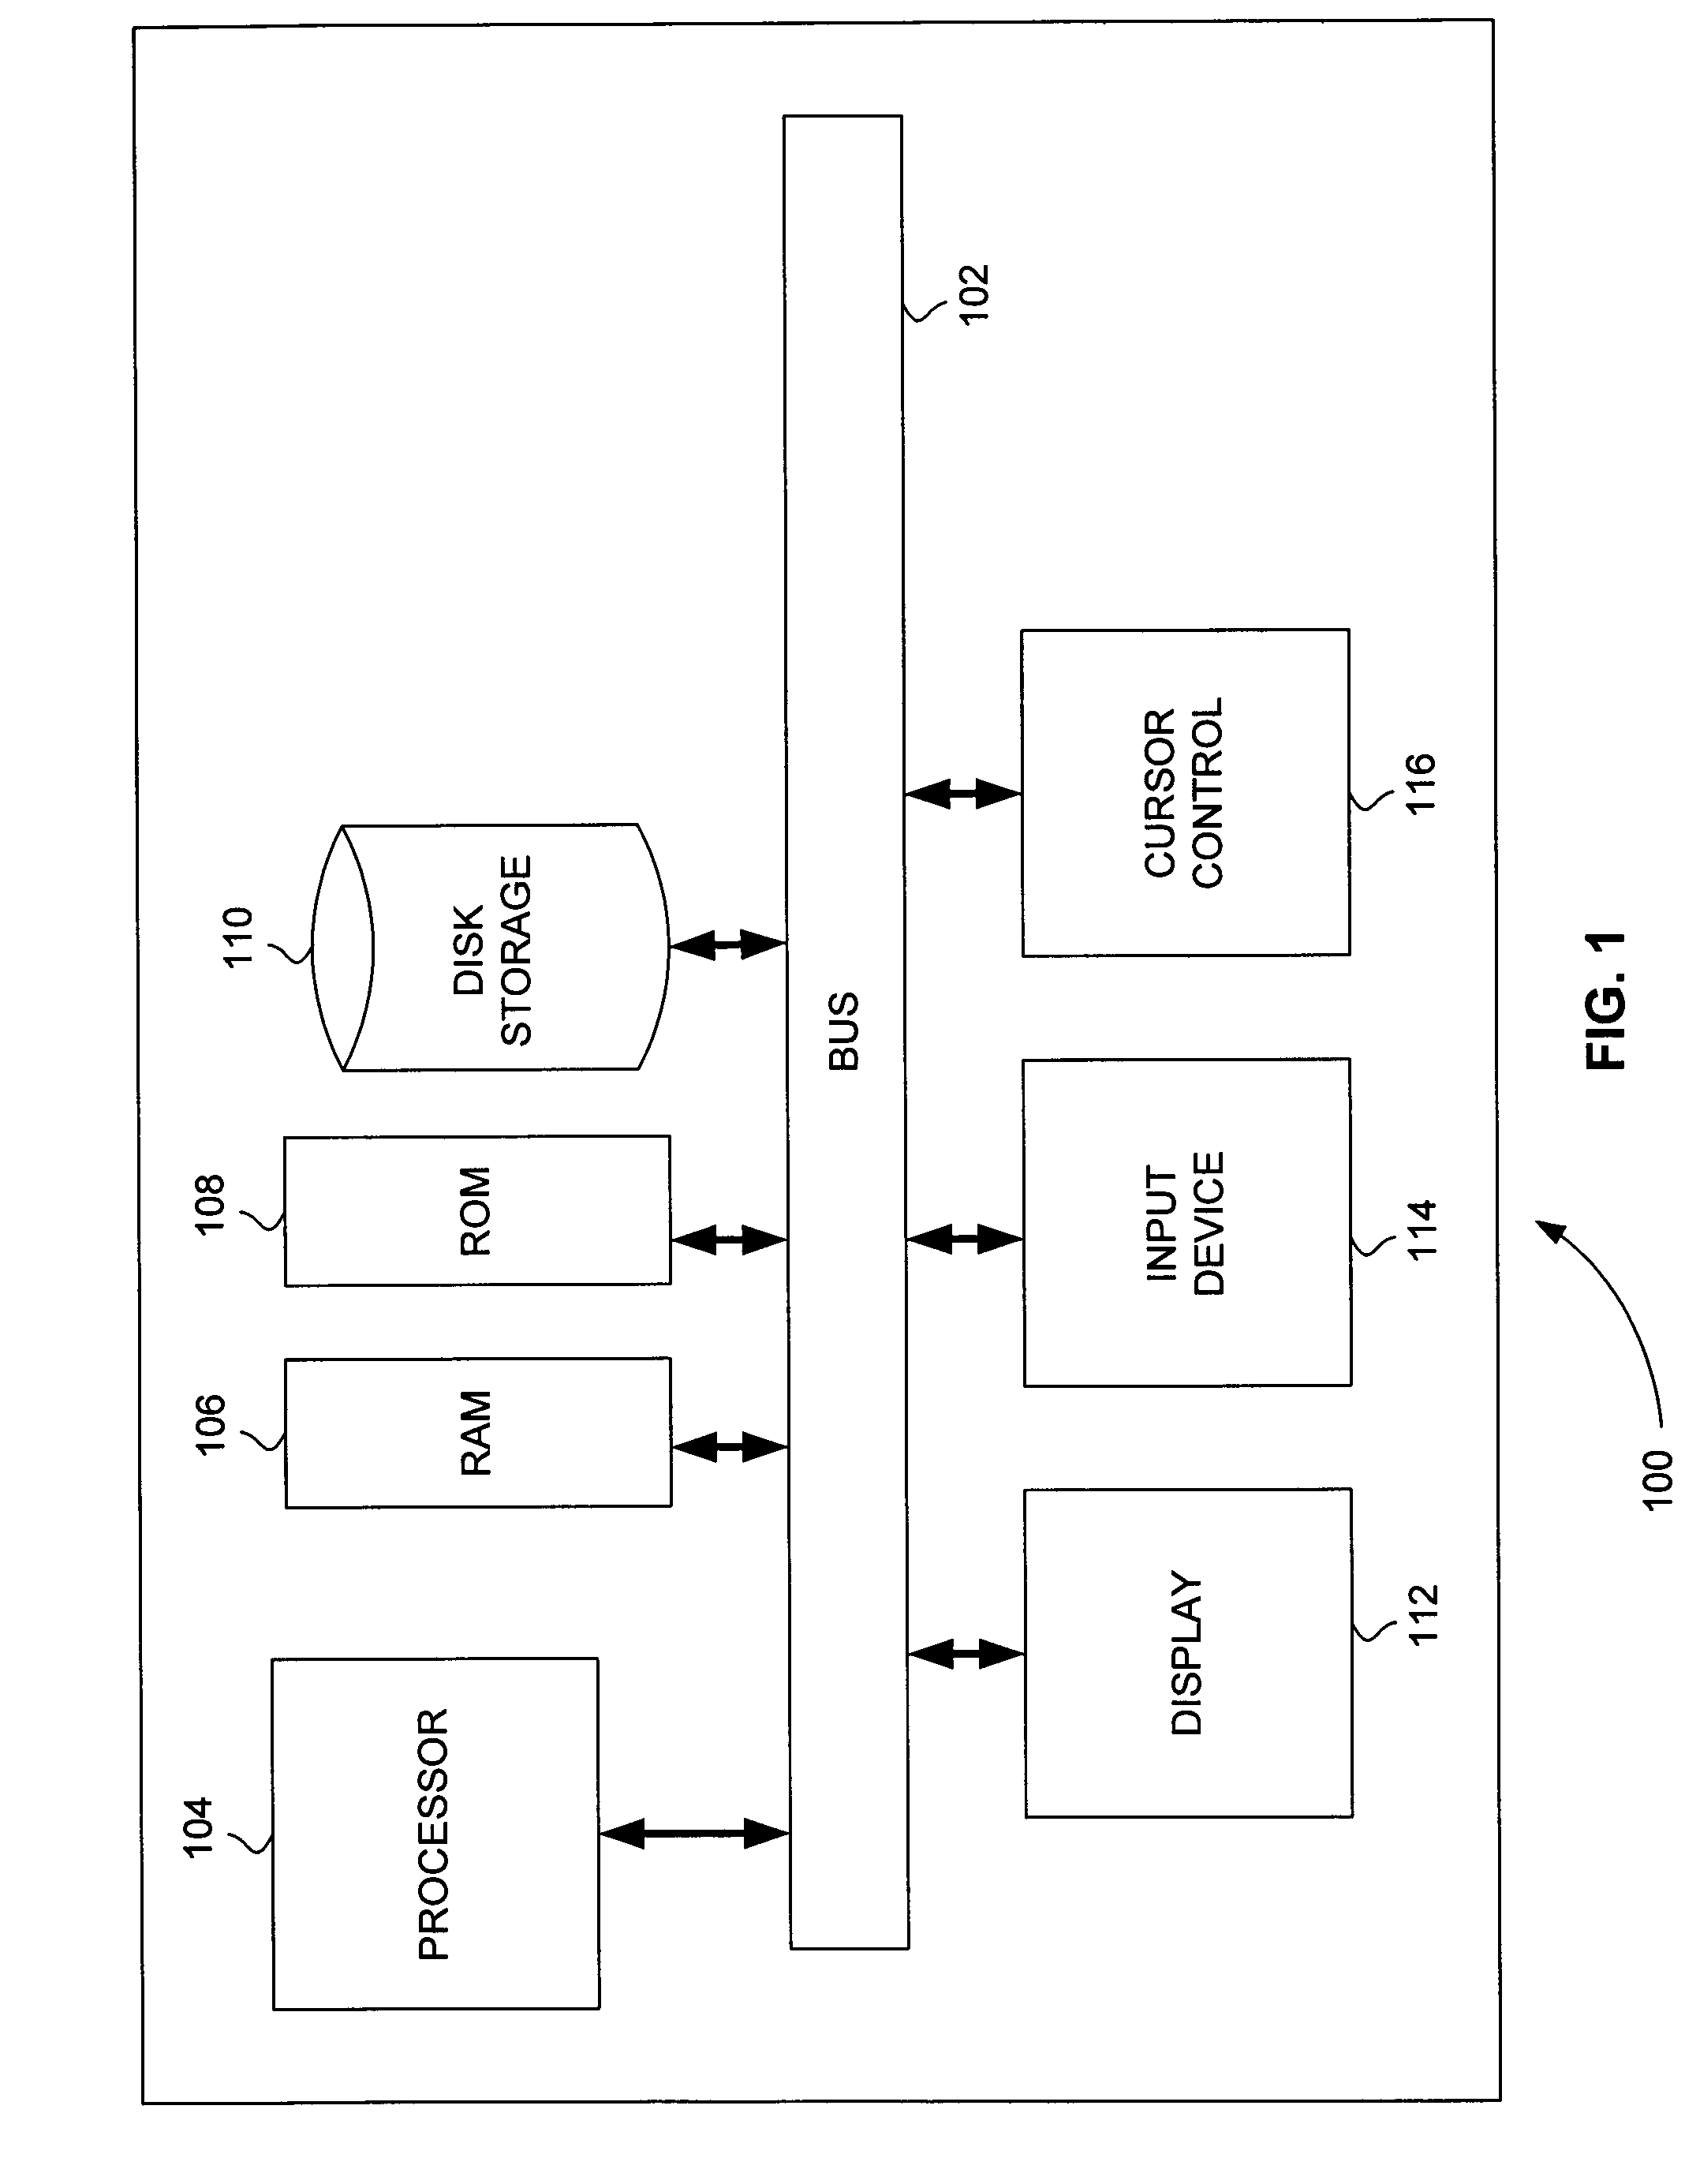 Systems and Methods for Rapidly Screening Samples by Mass Spectrometry